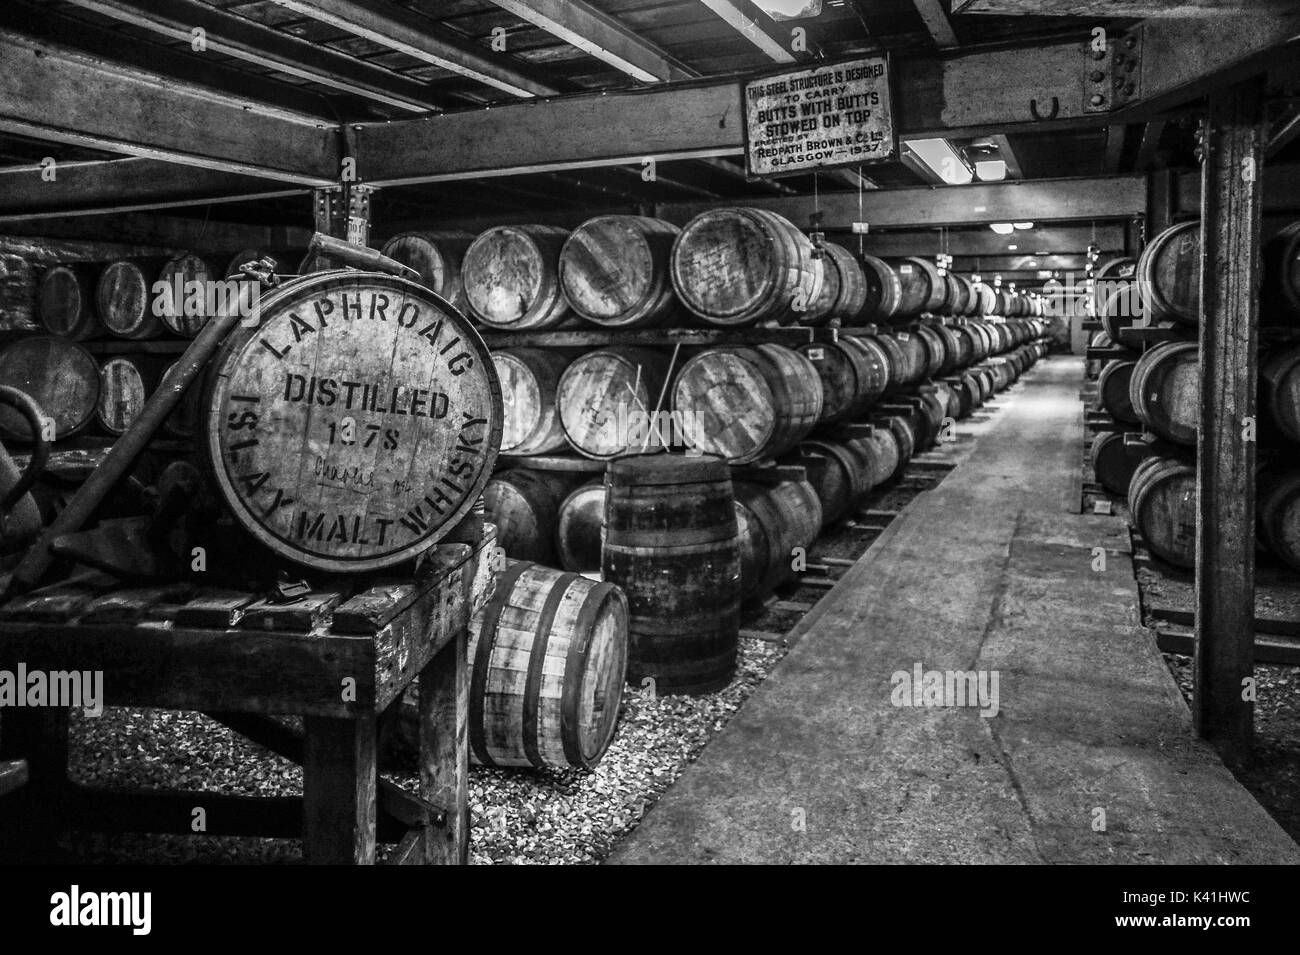 Black and white image of whisky maturing in barrels at the renowned Laphroaig Distillery, Isle of Islay, Scotland Stock Photo